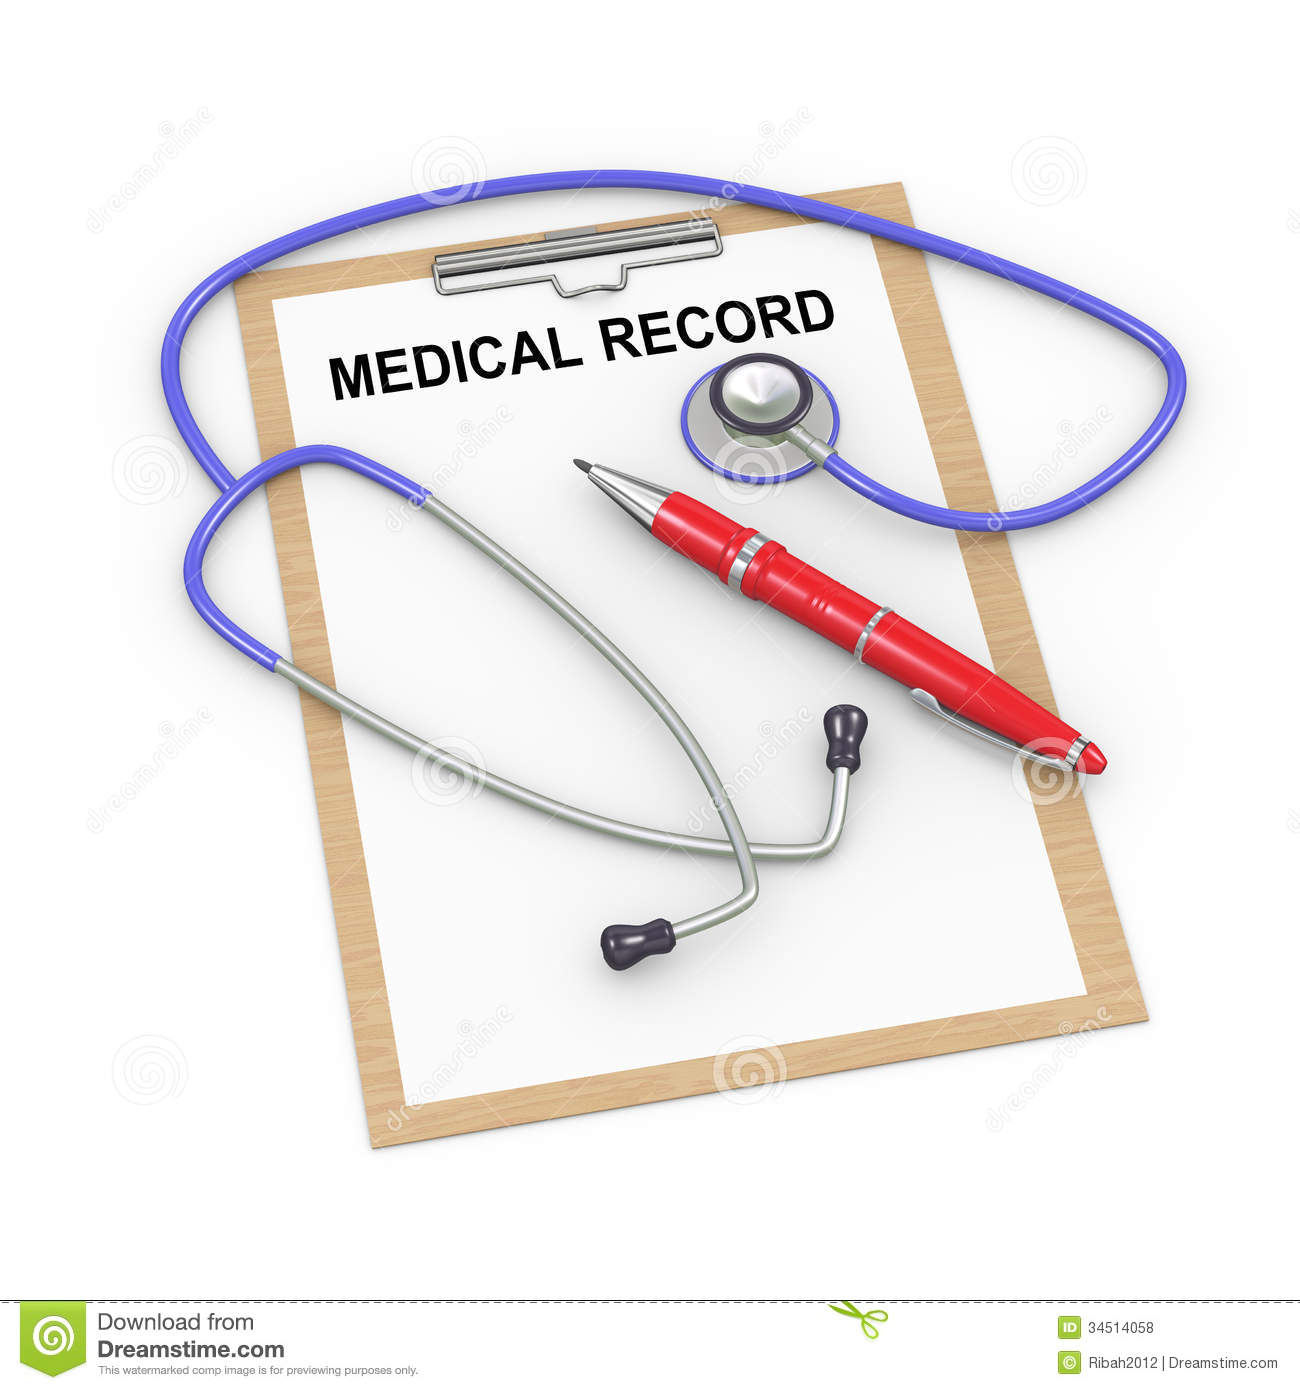 Illustration Of Stethoscope Pen And Medical History Record Clipboard